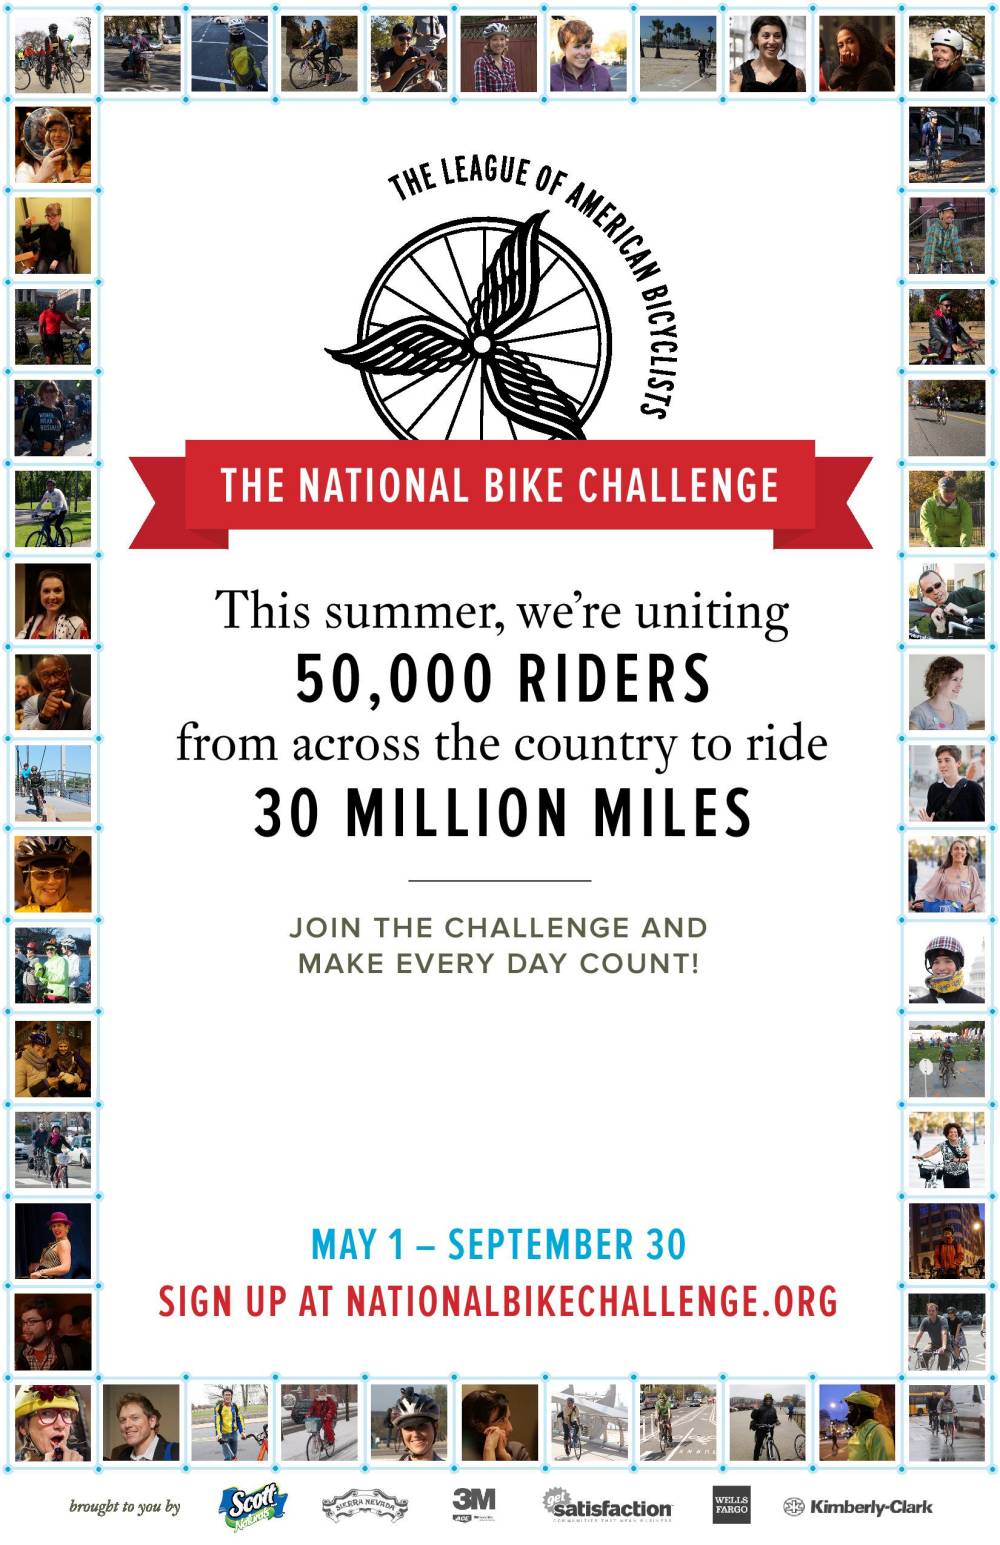 The National Bike Challenge Begins May 1st